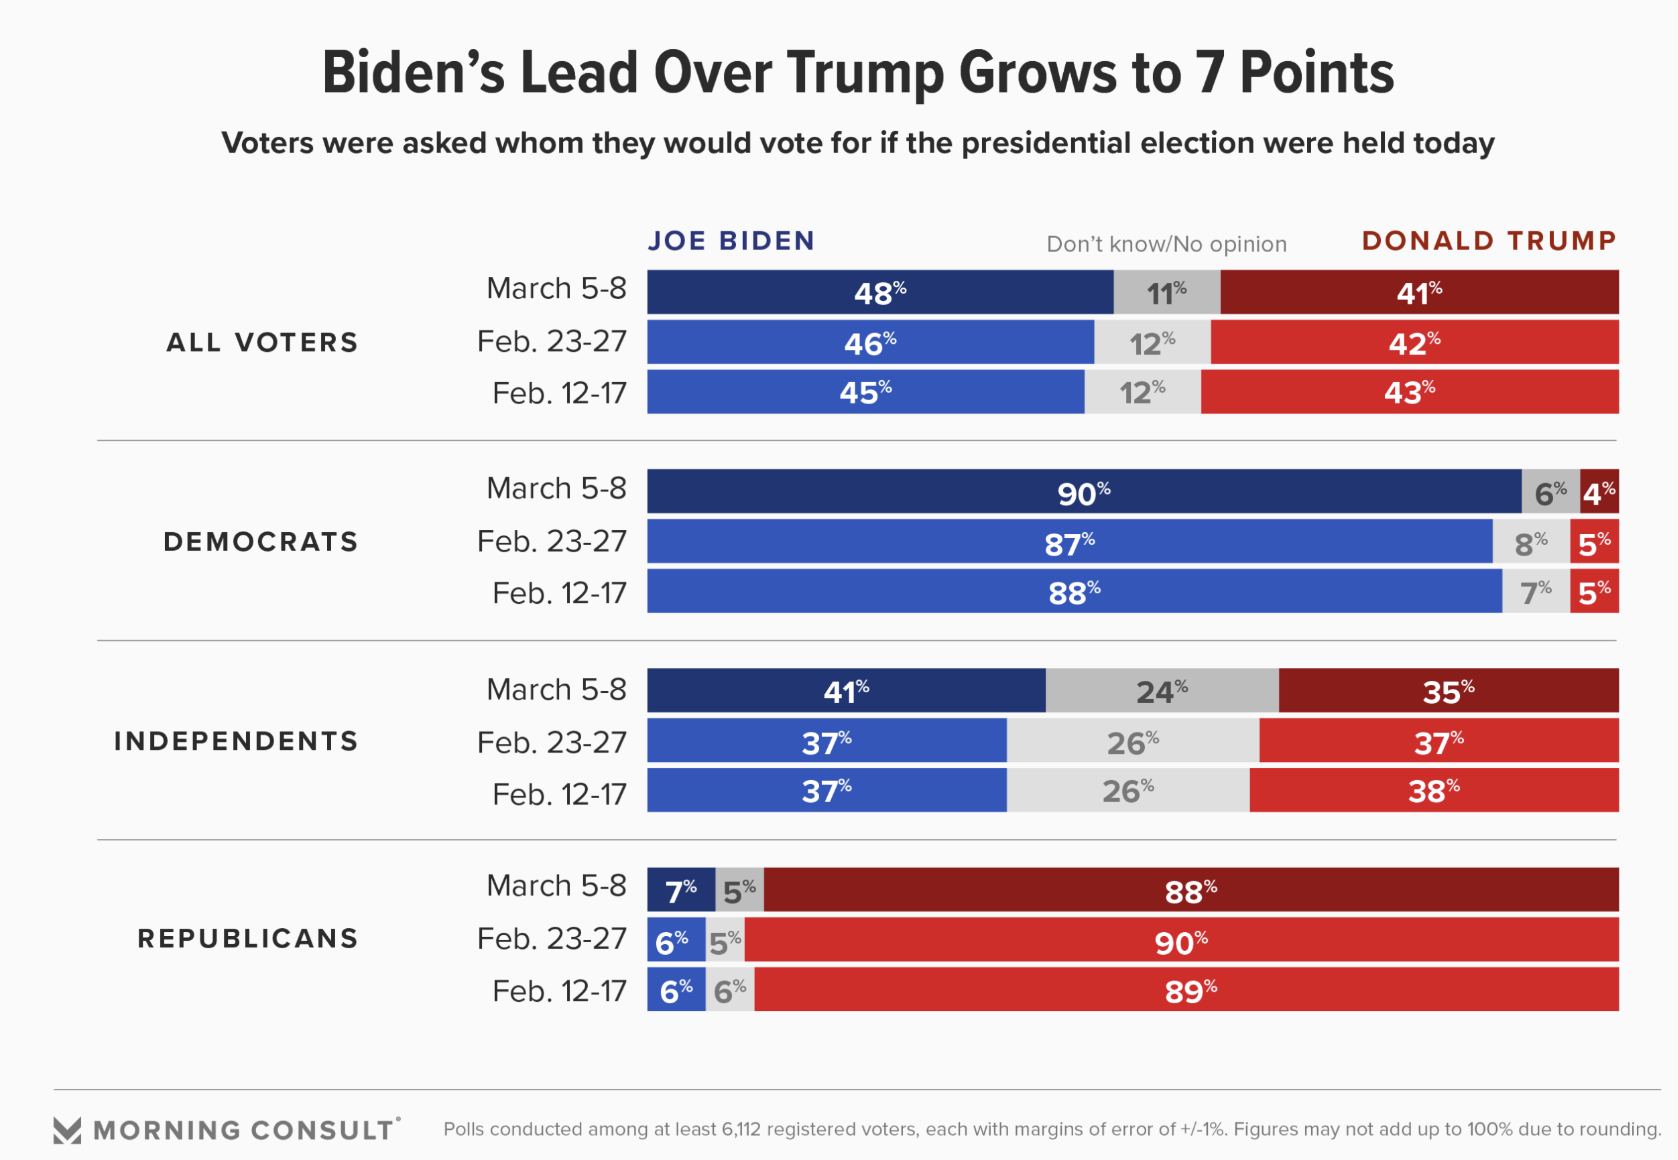 POLL Morning Consult Poll Finds Joe Biden Leading Donald Trump by 7